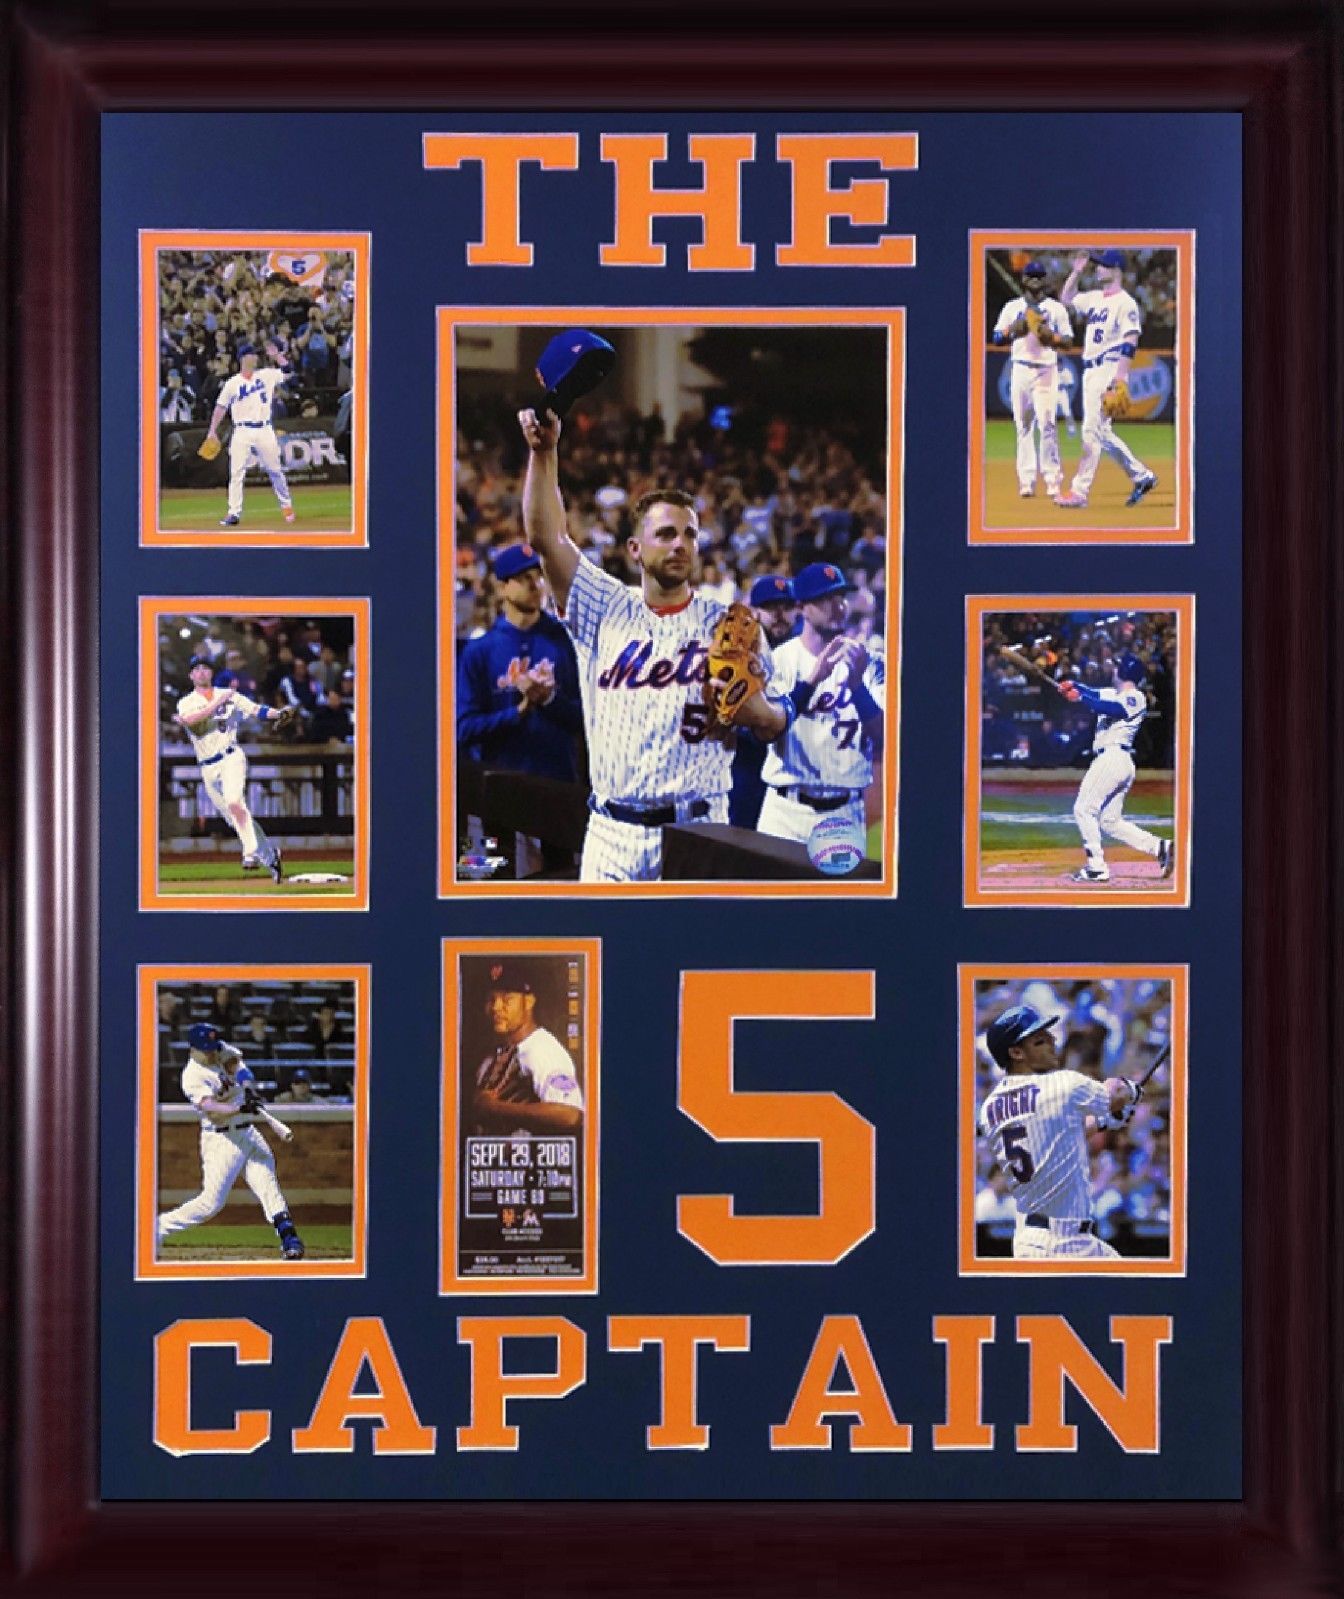 David Wright The Captain #5 NY Mets 7 photo replica ticket framed 22×26 collage